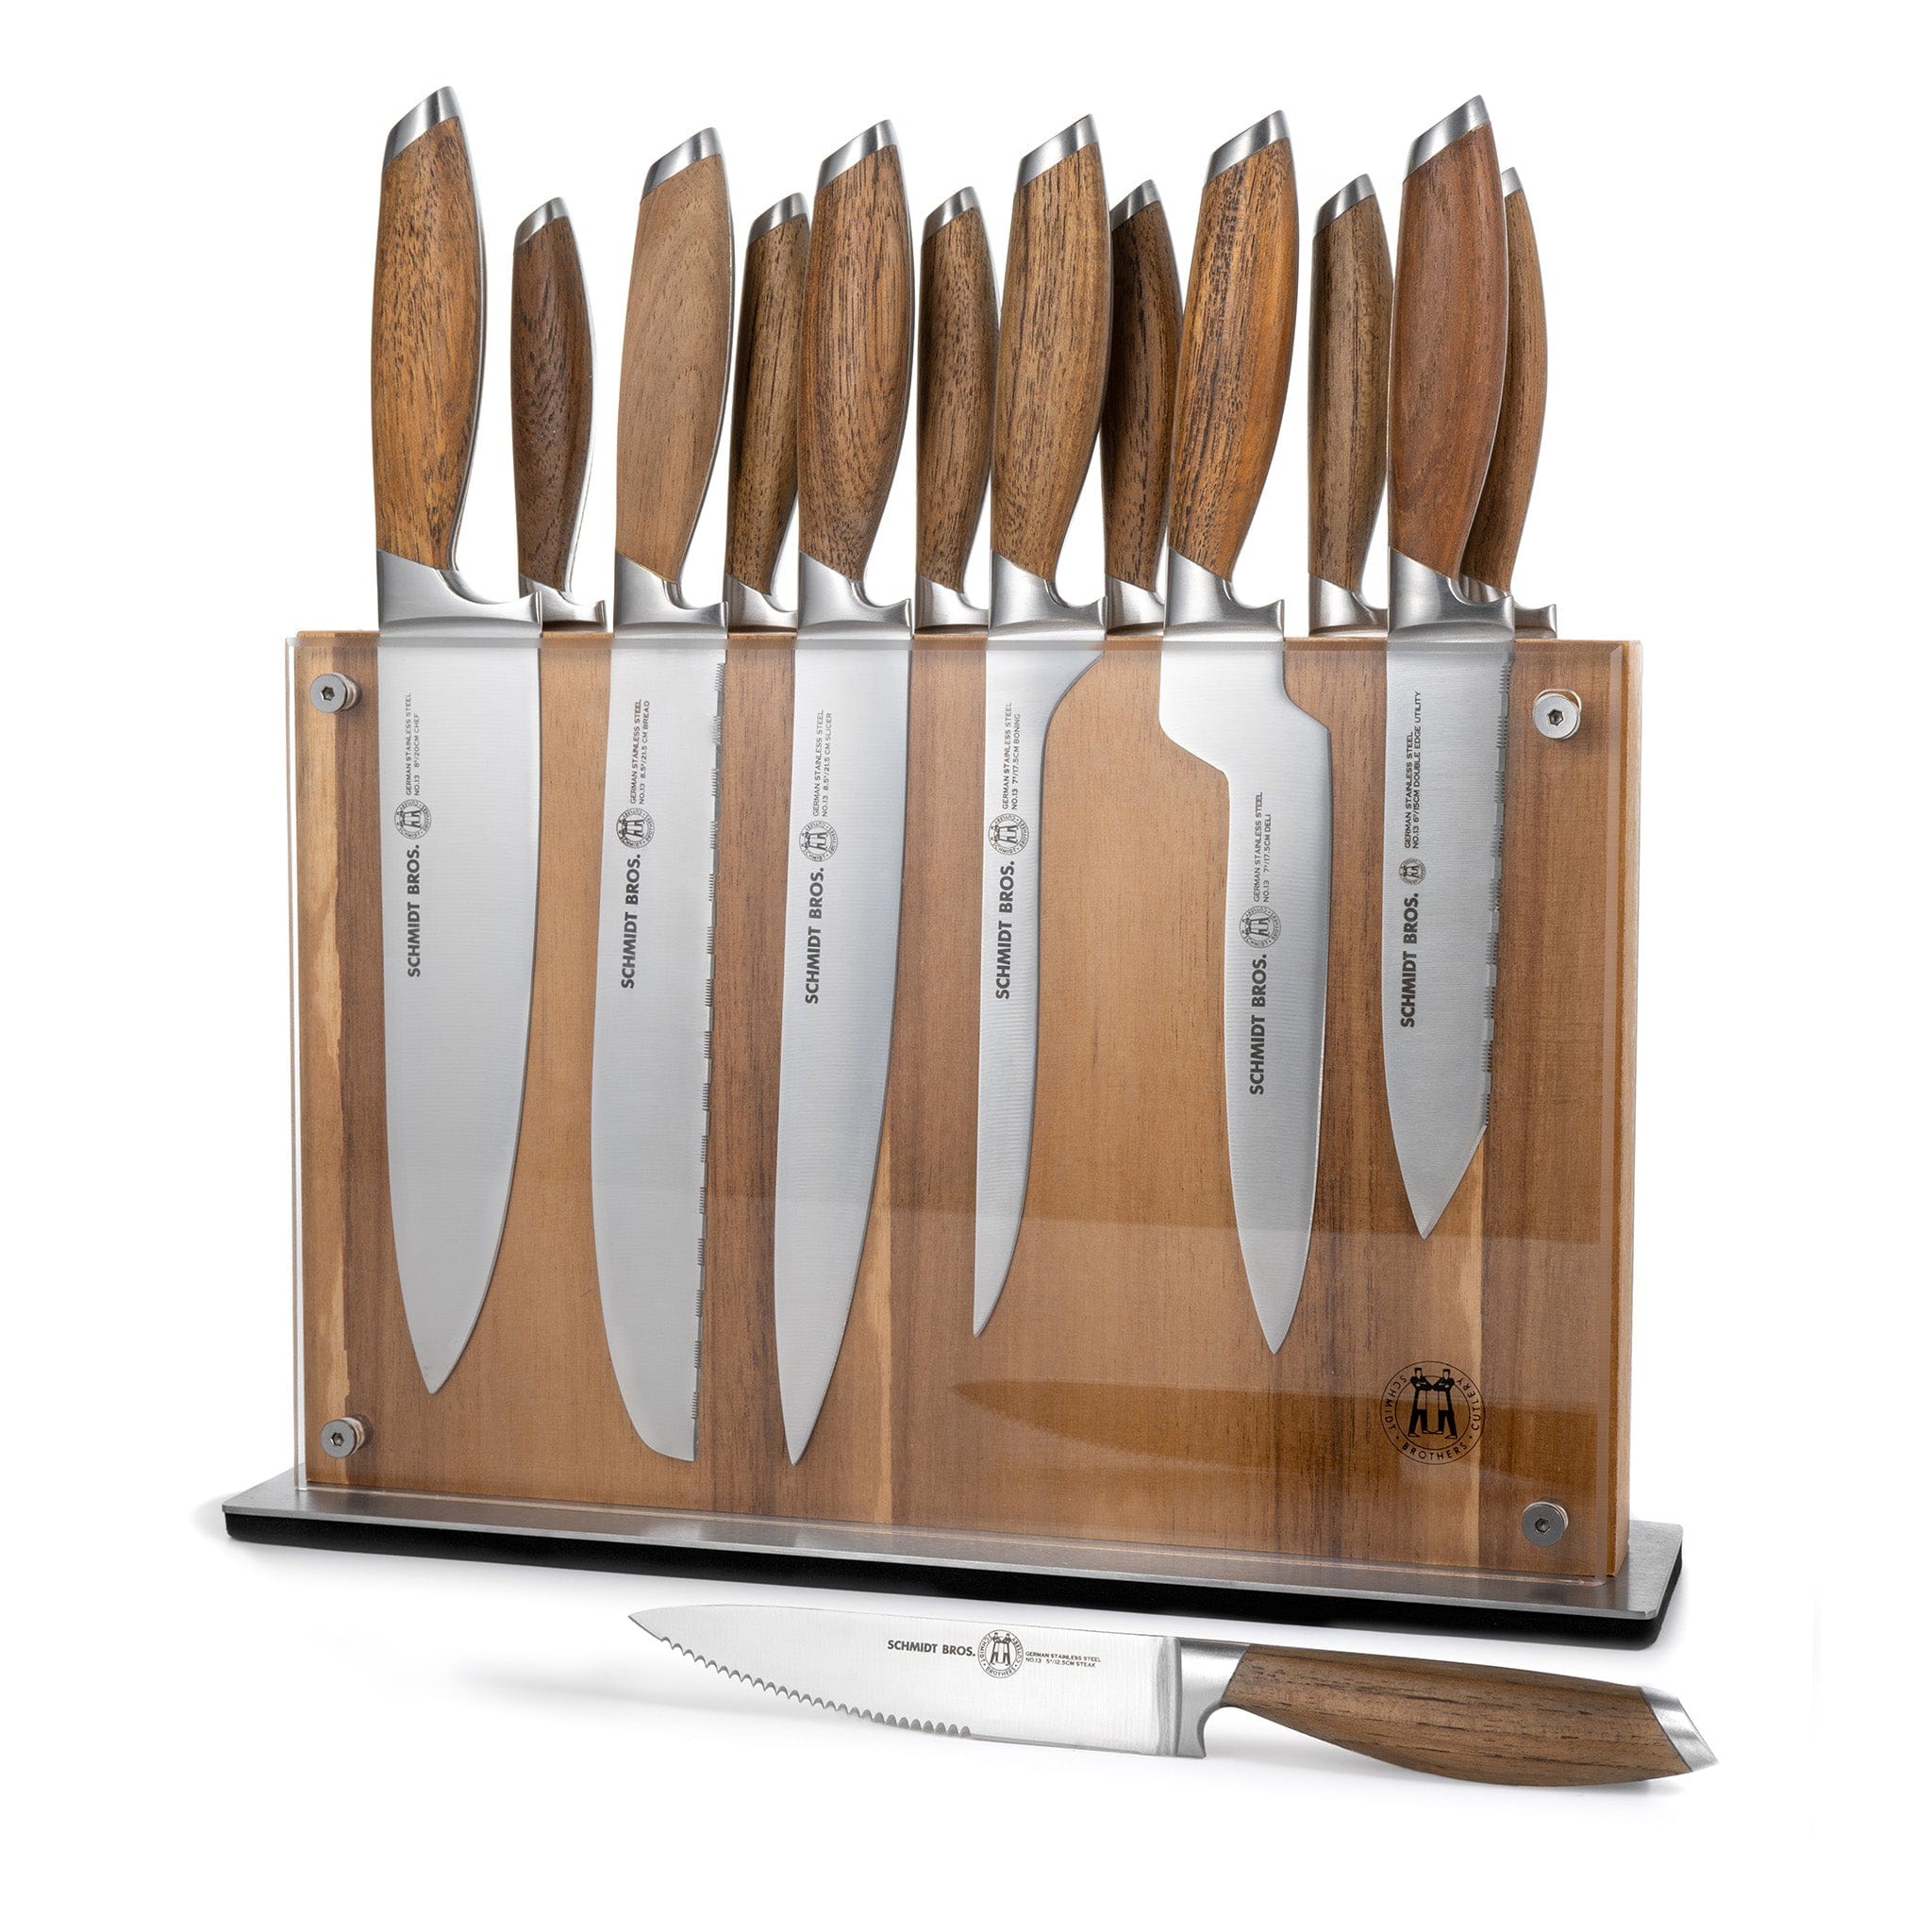 http://schmidtbrothers.com/cdn/shop/files/schmidt-brothers-kitchen-cutlery-schmidt-brothers-bonded-teak-15-piece-knife-set-high-carbon-stainless-steel-cutlery-in-acacia-magnetic-knife-block-and-knife-sharpener-30743396122685.jpg?v=1684156237